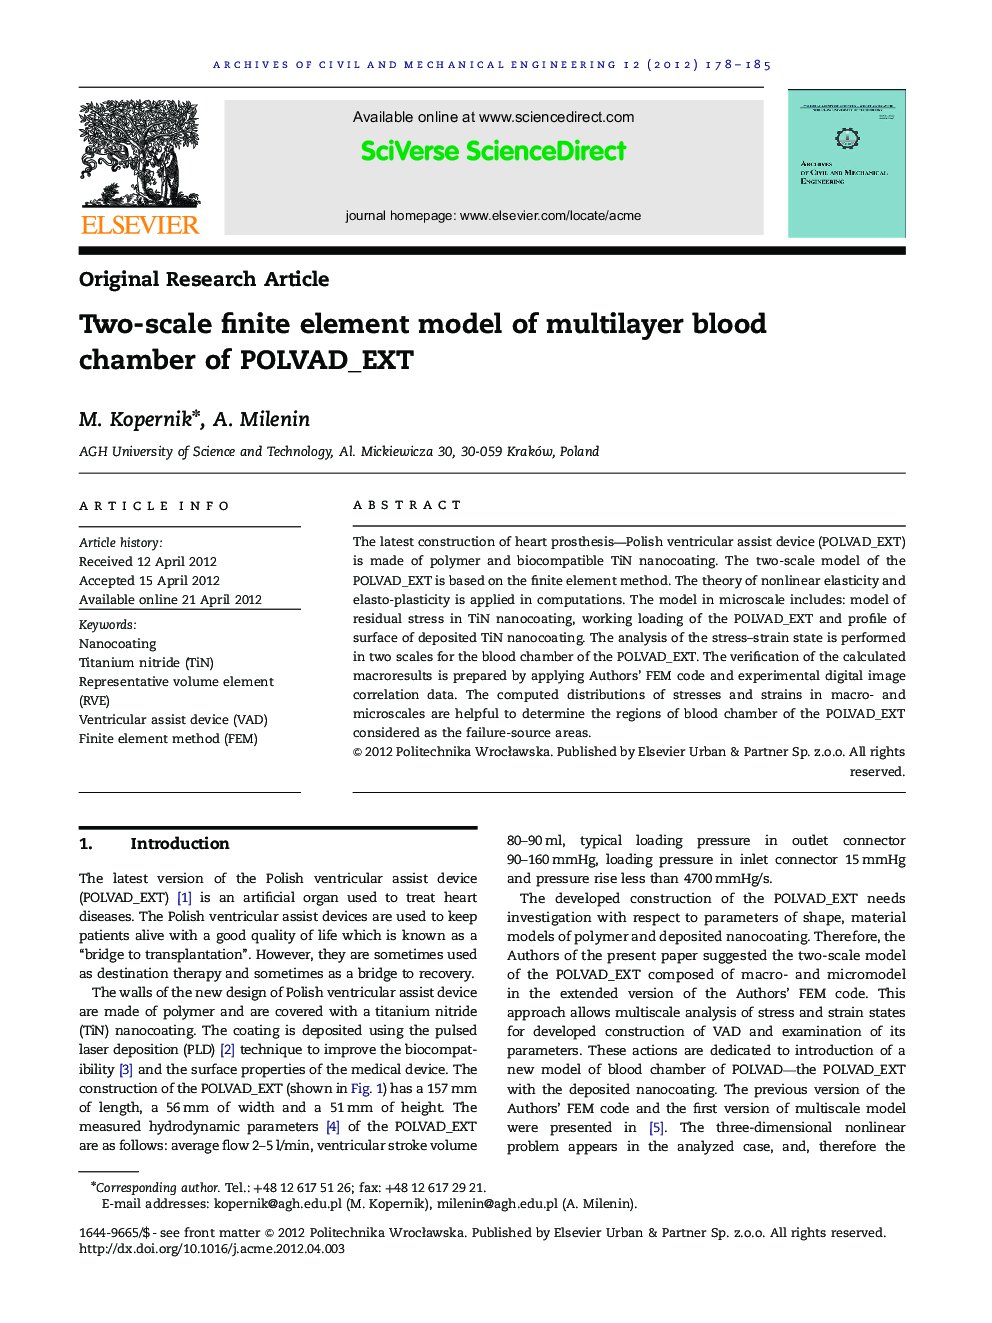 Two-scale finite element model of multilayer blood chamber of POLVAD_EXT